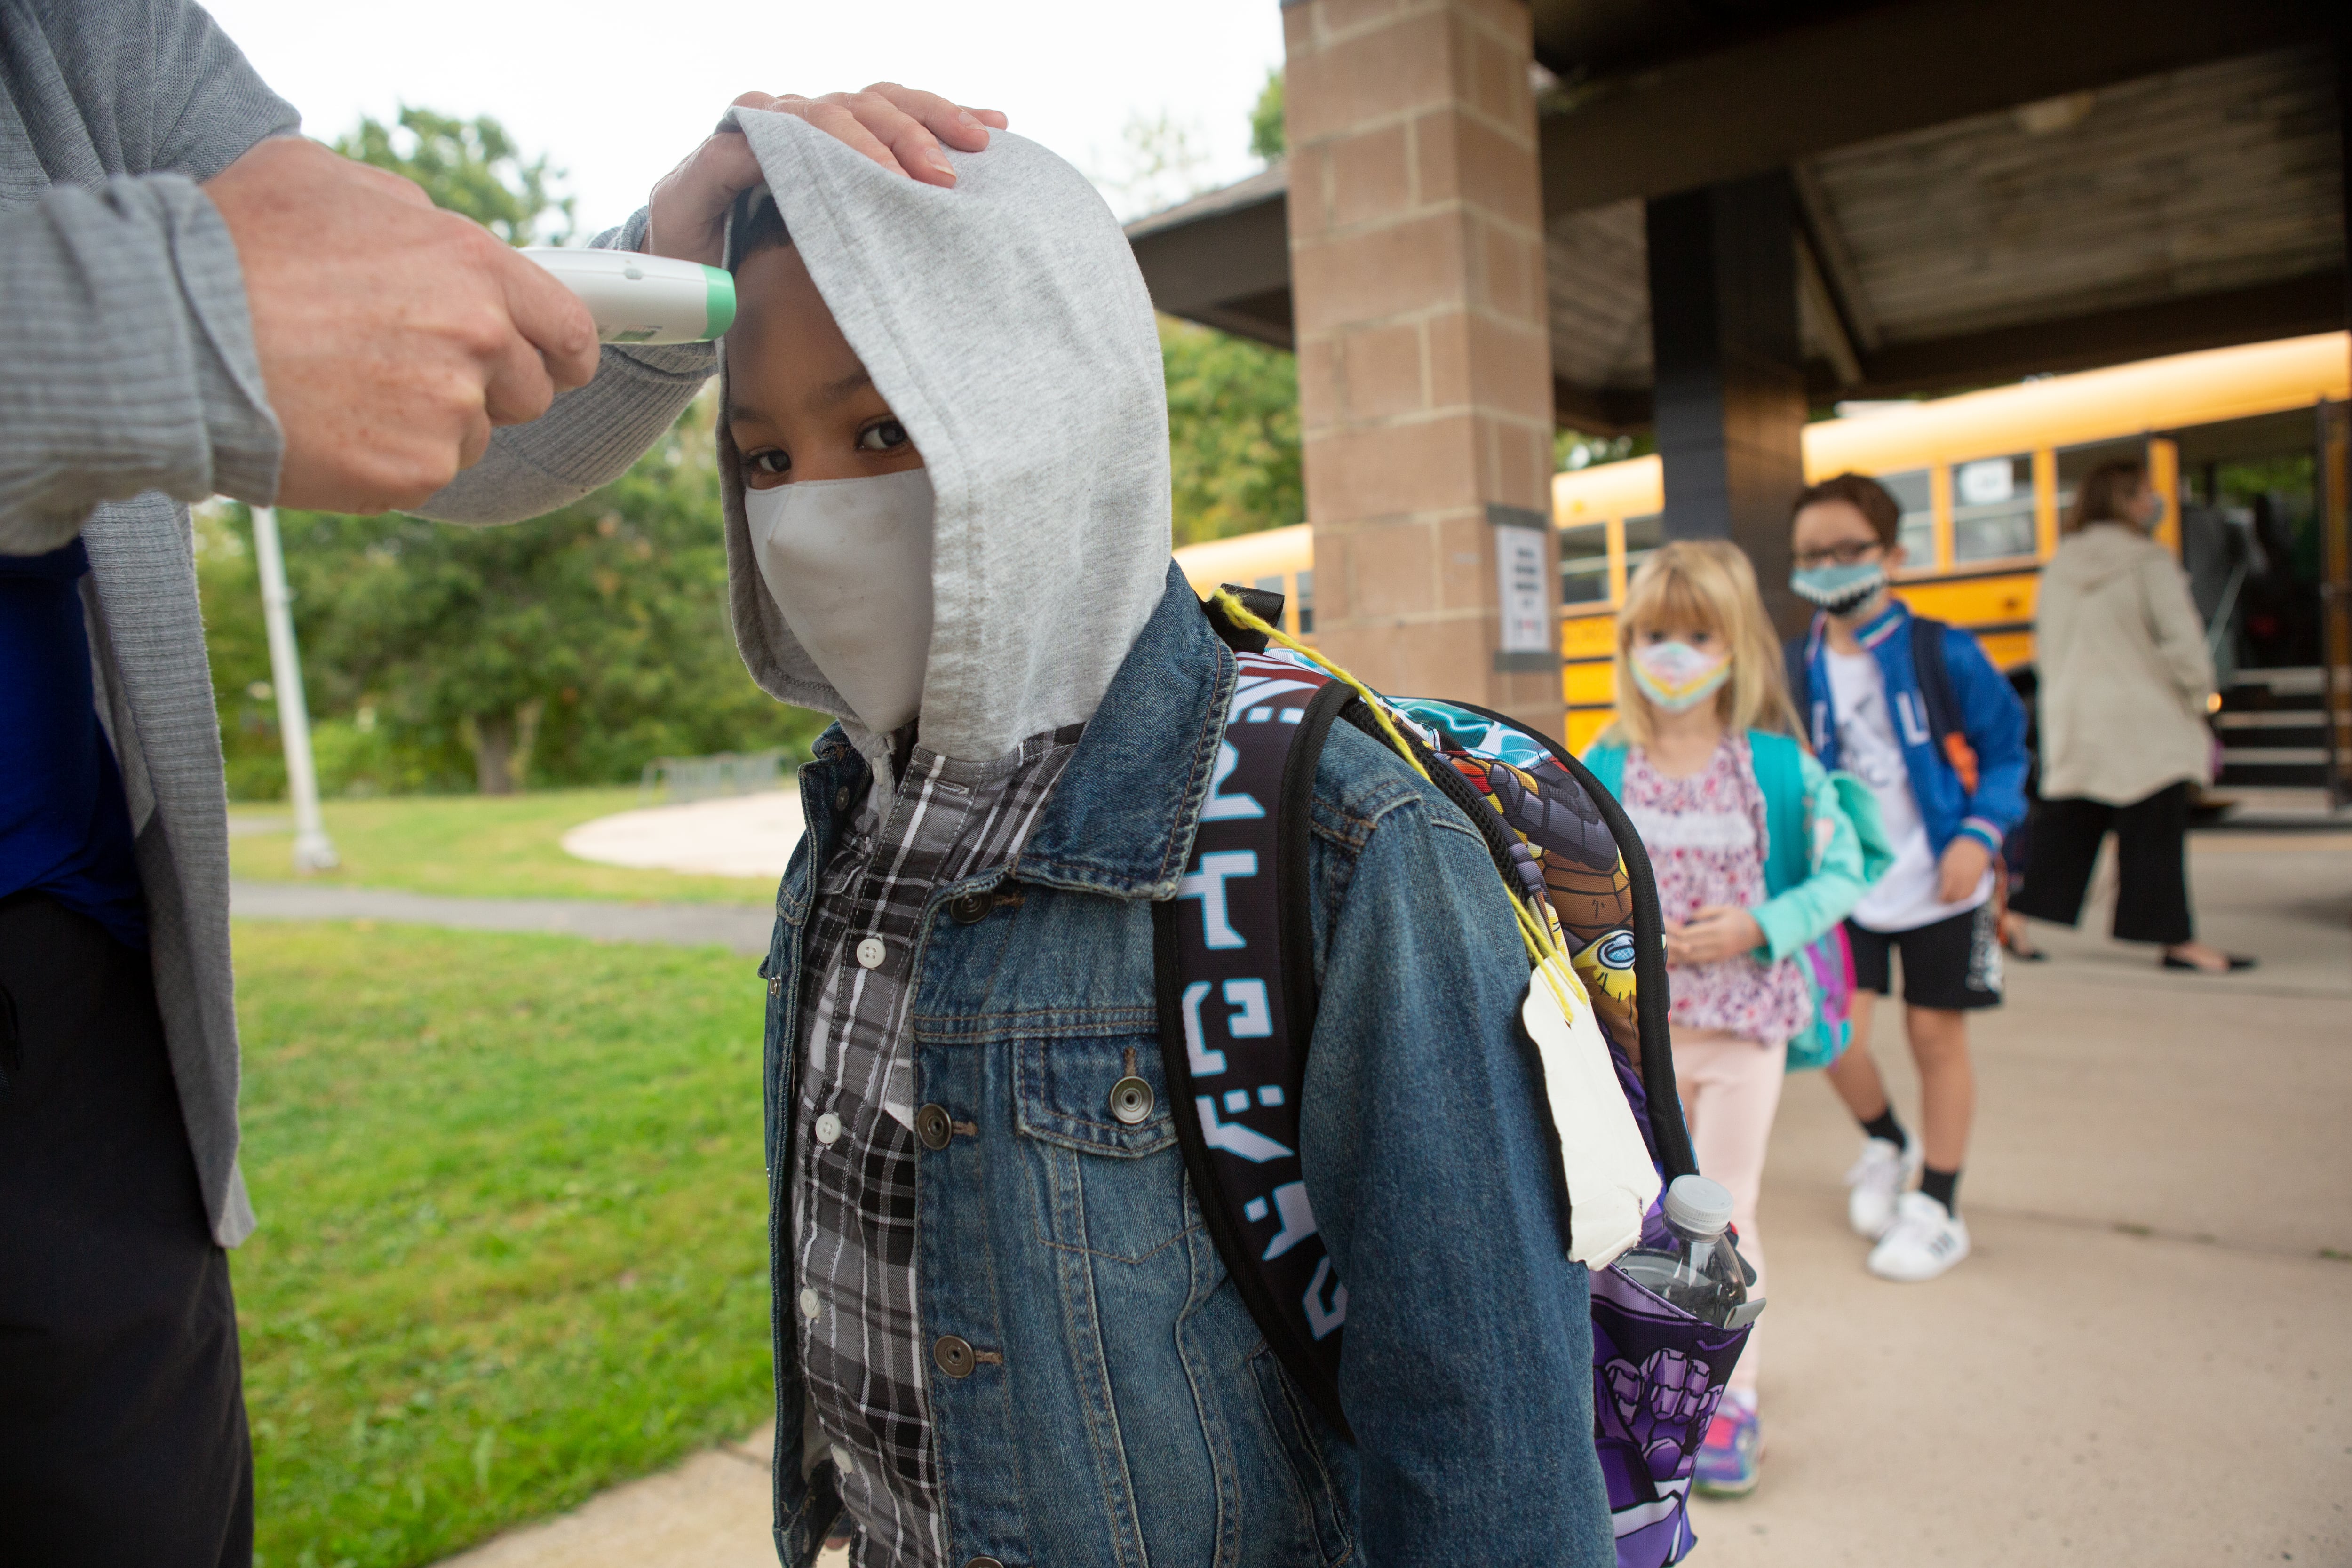 Students are giving temperature checks by the school nurse before being allowed into the building at Wesley Elementary School in Middletown, CT, October 5, 2020.